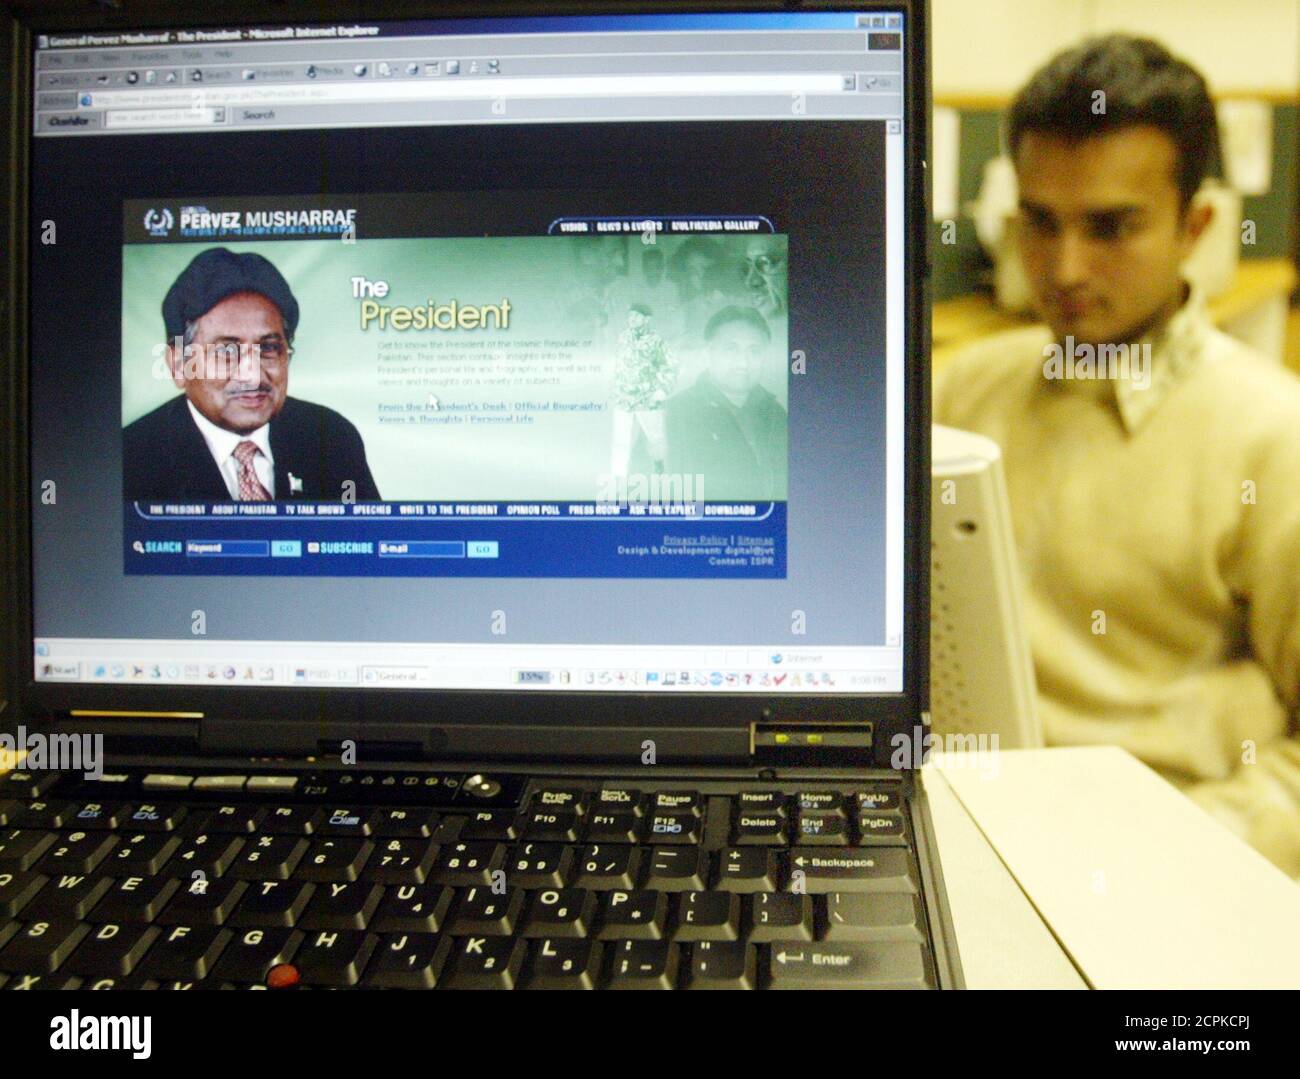 A man browses the official website of the Pakistani President Pervez Musharraf on the internet in Islamabad.  A man browses the official website of the Pakistani President Pervez Musharraf on the internet in Islamabad, February 24, 2005. Only the war with India in 1965 saved Pakistan's President Musharraf from being court martialled. This story of his early brush with authority is how Musharraf opens an account of his personal and professional life in a letter posted on his official website which was launched on Thursday. REUTERS/Mian Khursheed Stock Photo